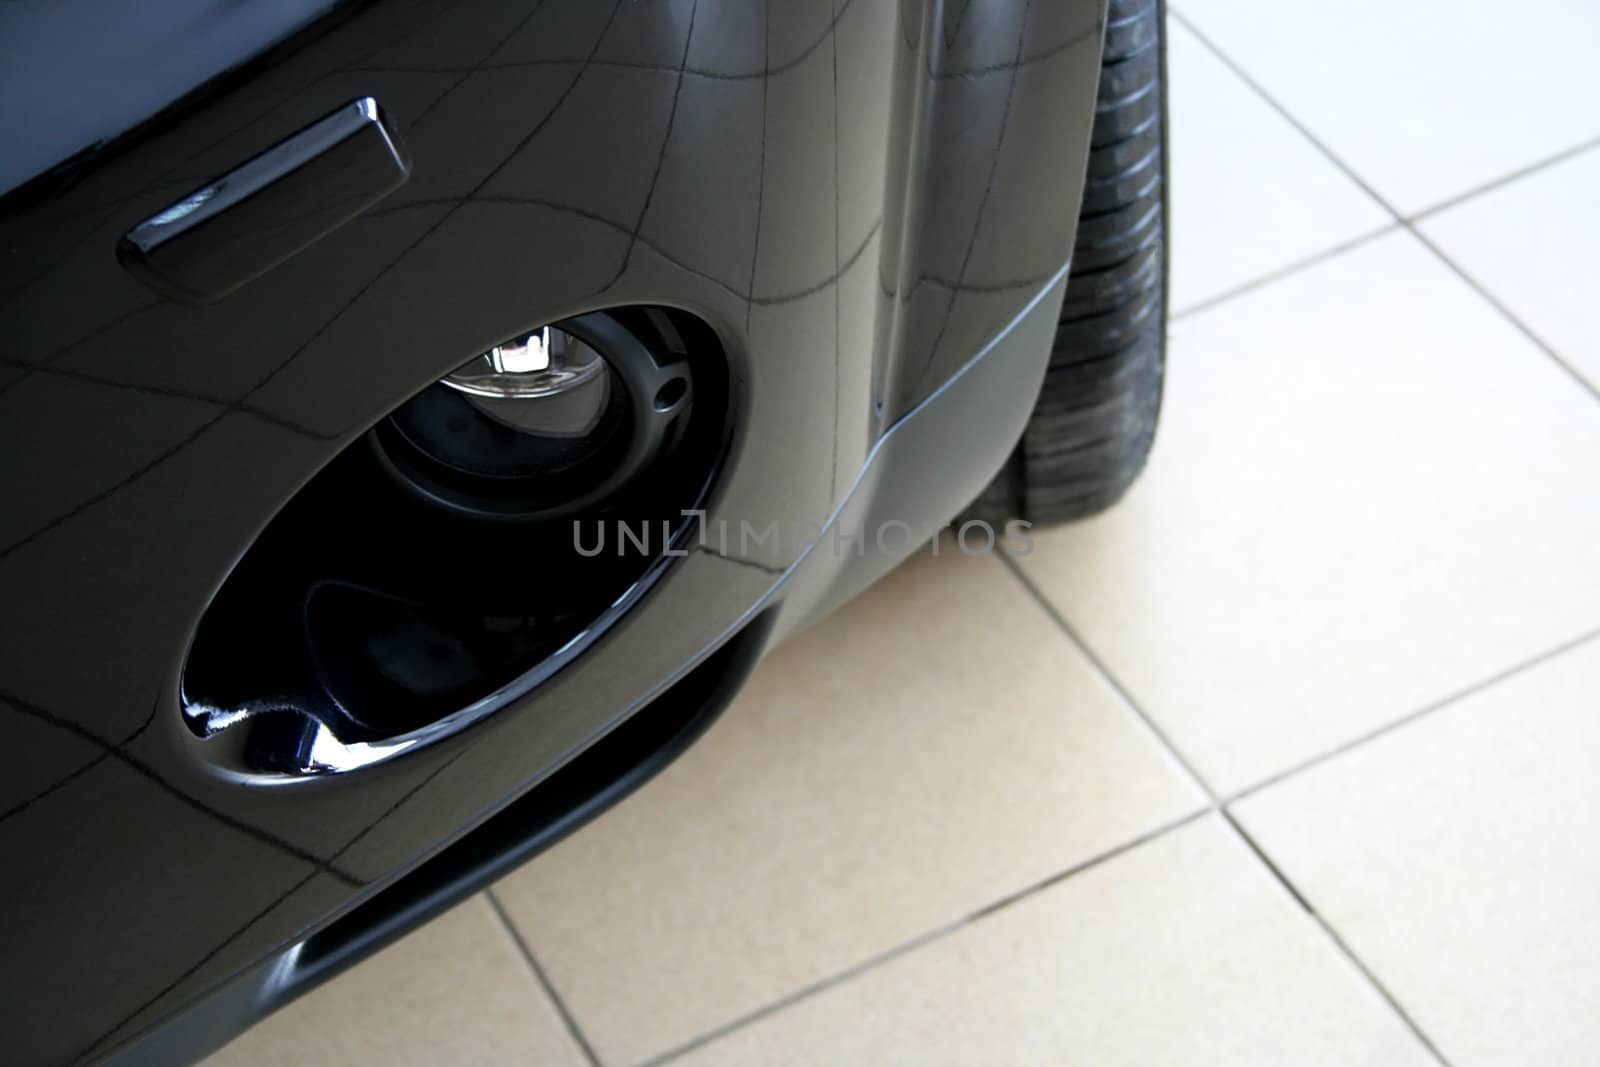 The black sports car on ceramic to a floor